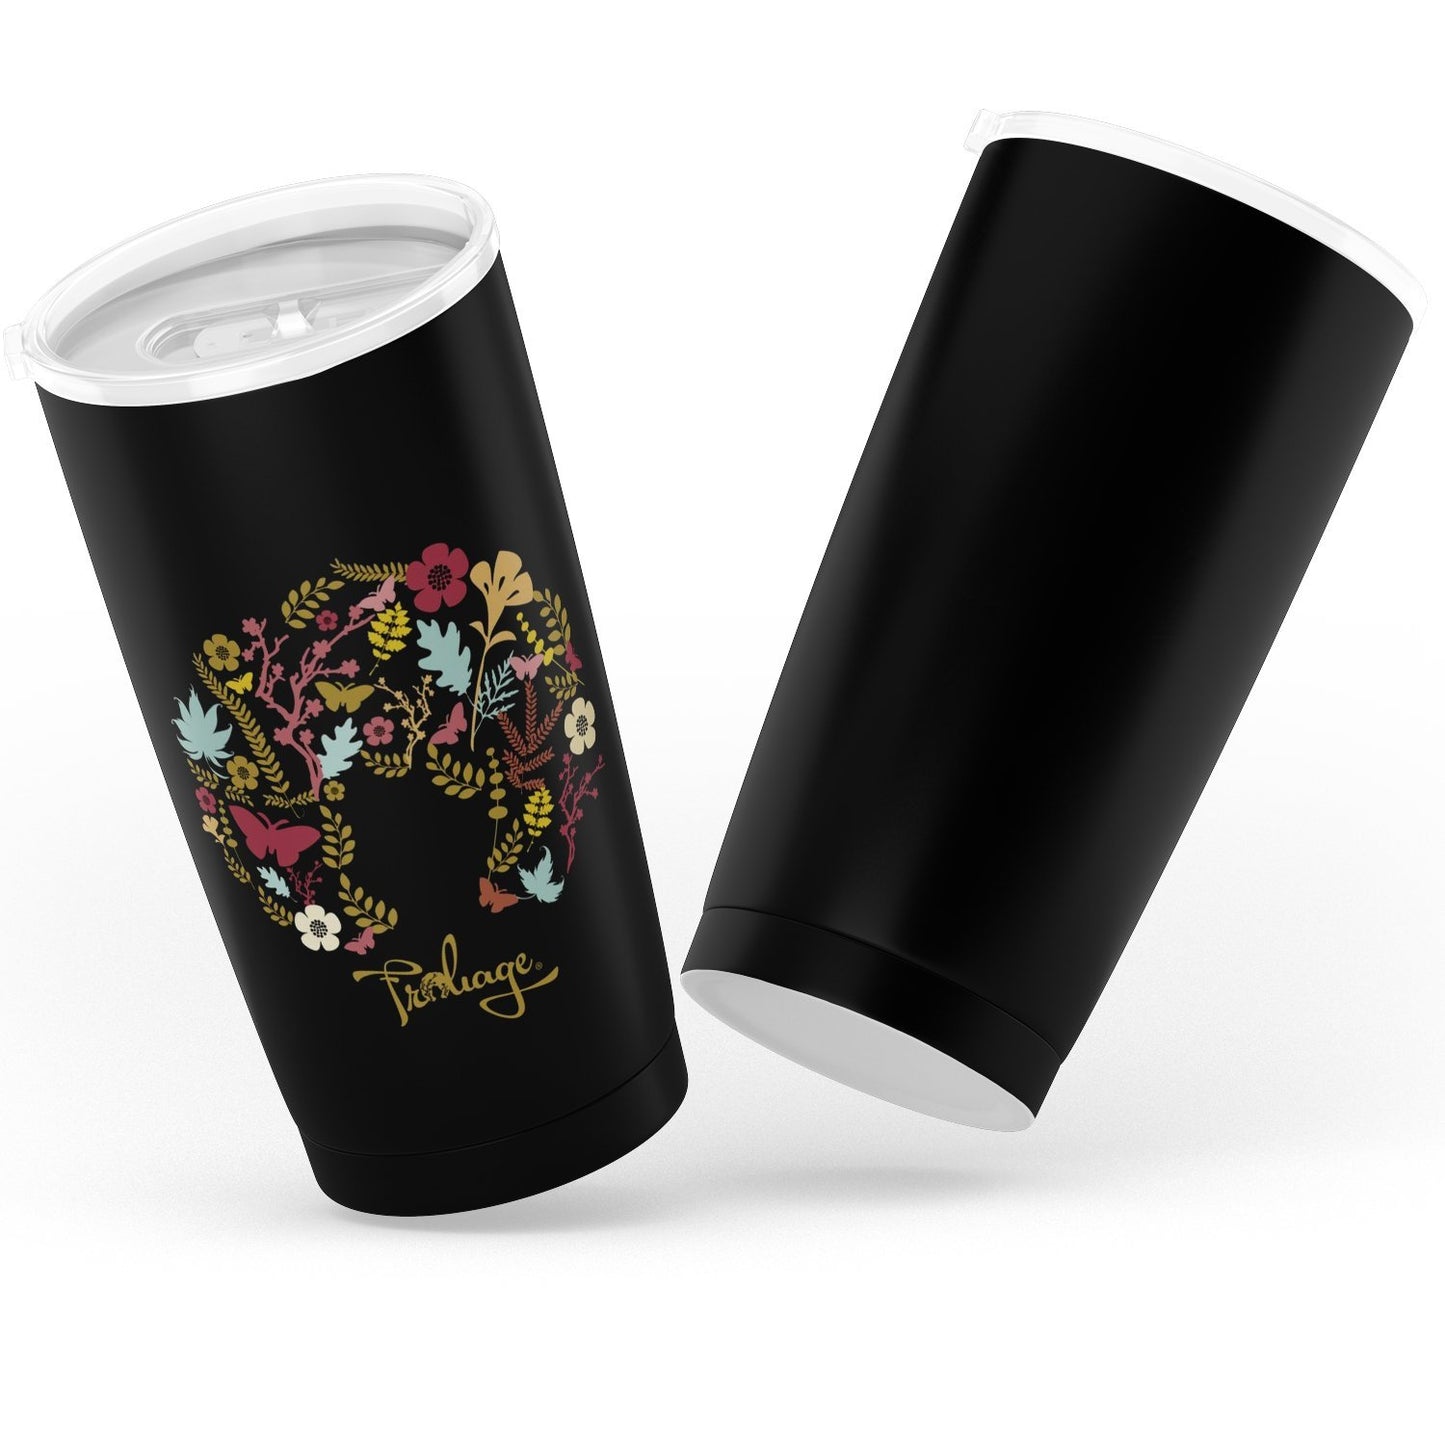 Froliage Tumbler - Froliage